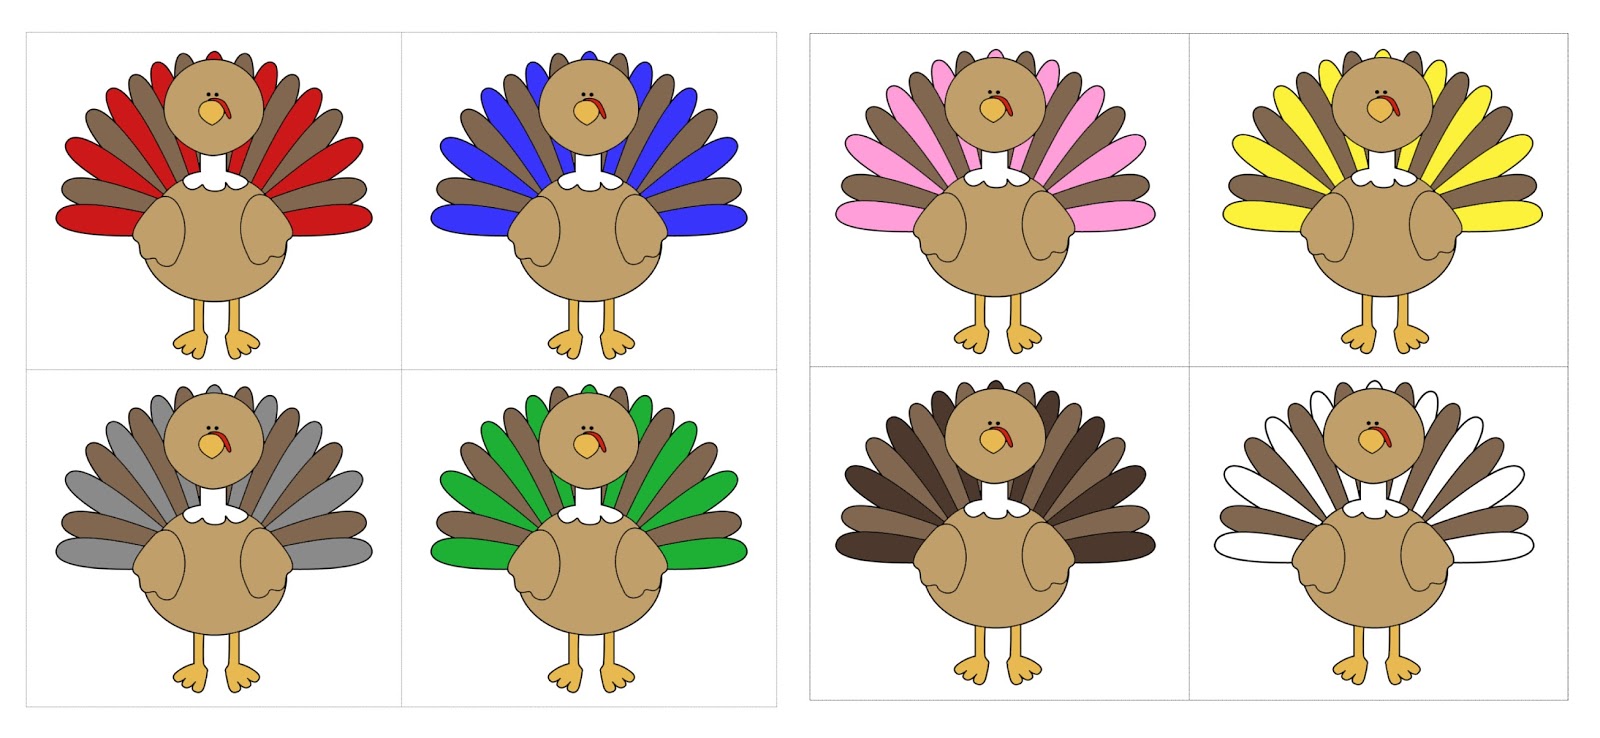 ourhomecreations: Thanksgivng color recognition game: I'm Going on